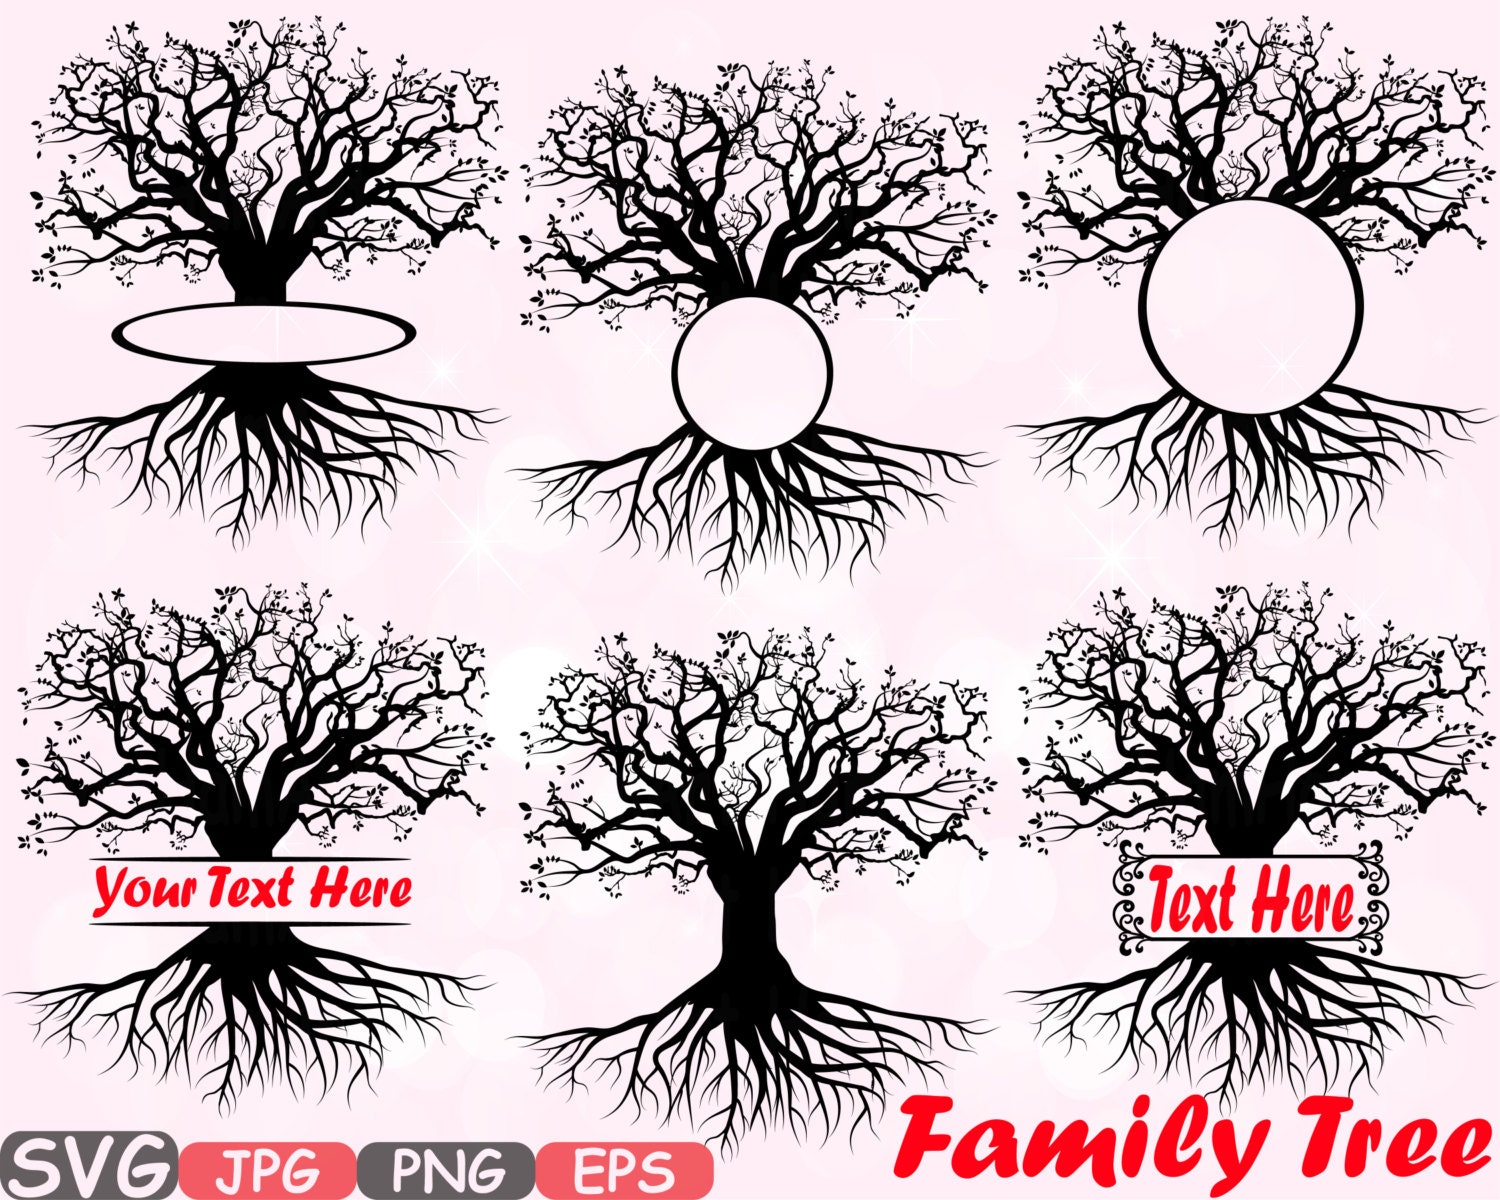 Download Family tree Split / Circle Silhouette SVG Cutting Files Family